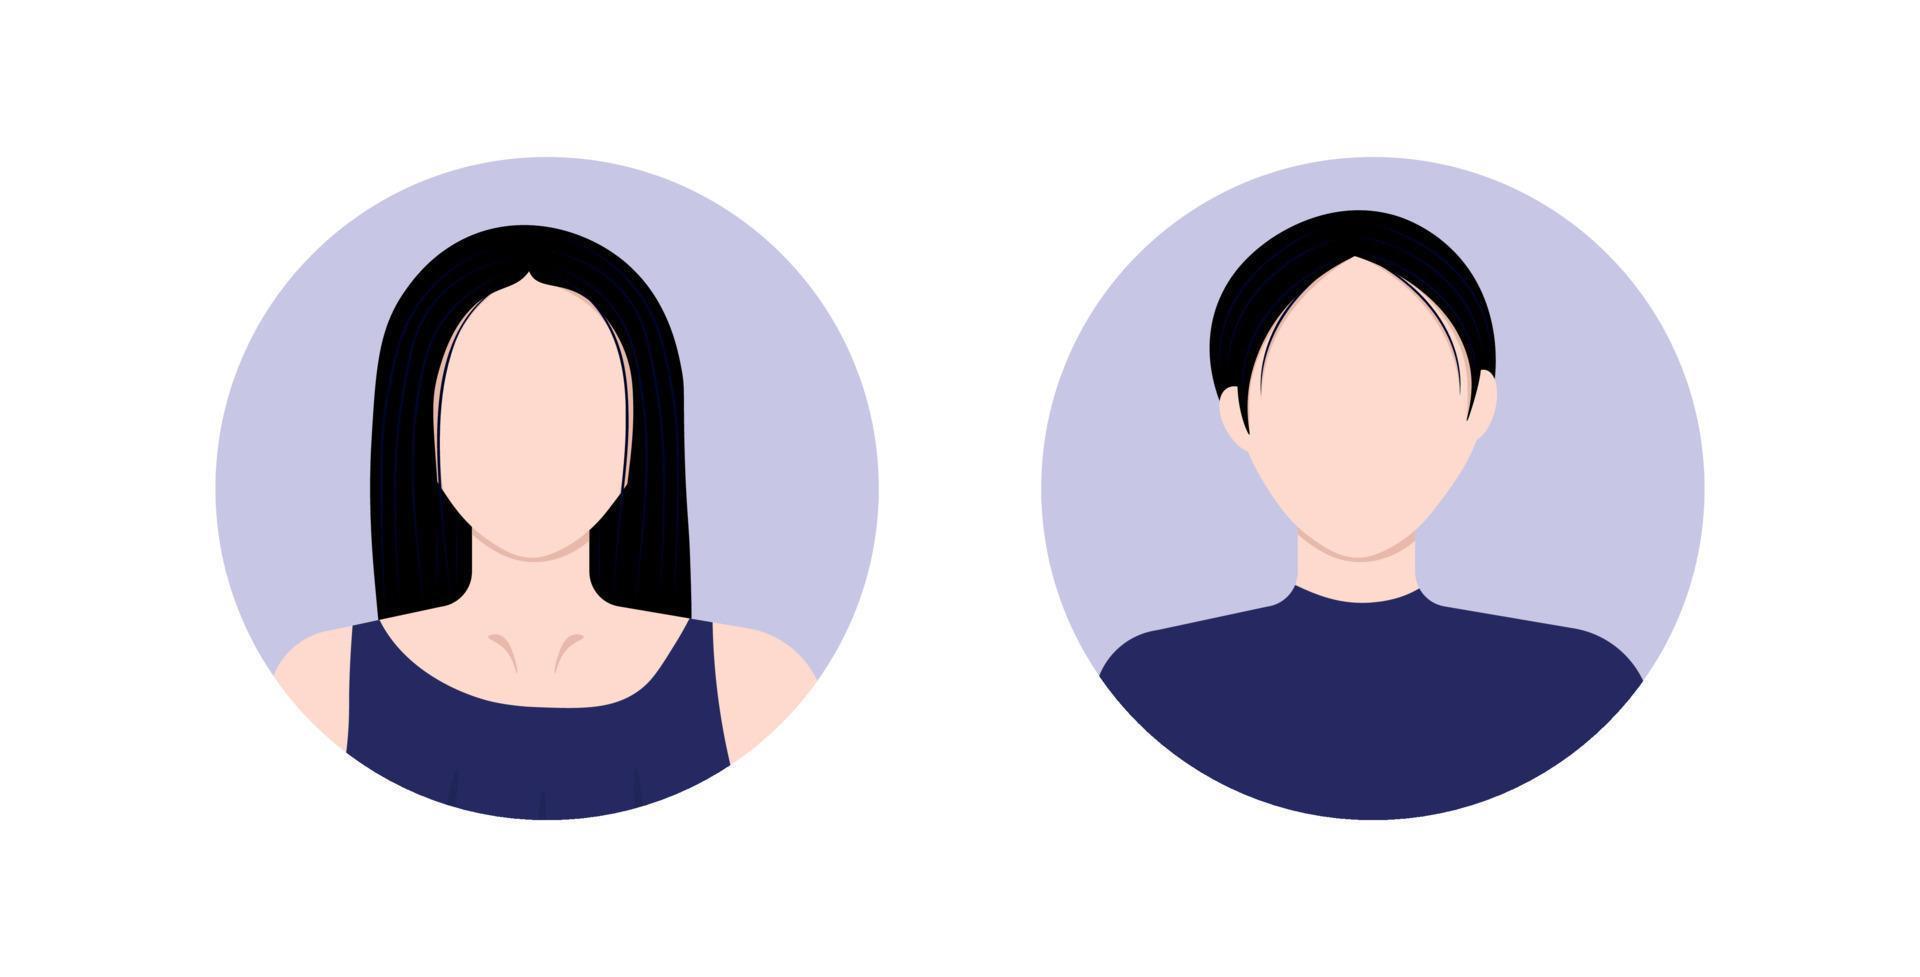 Man and woman avatar icons vector